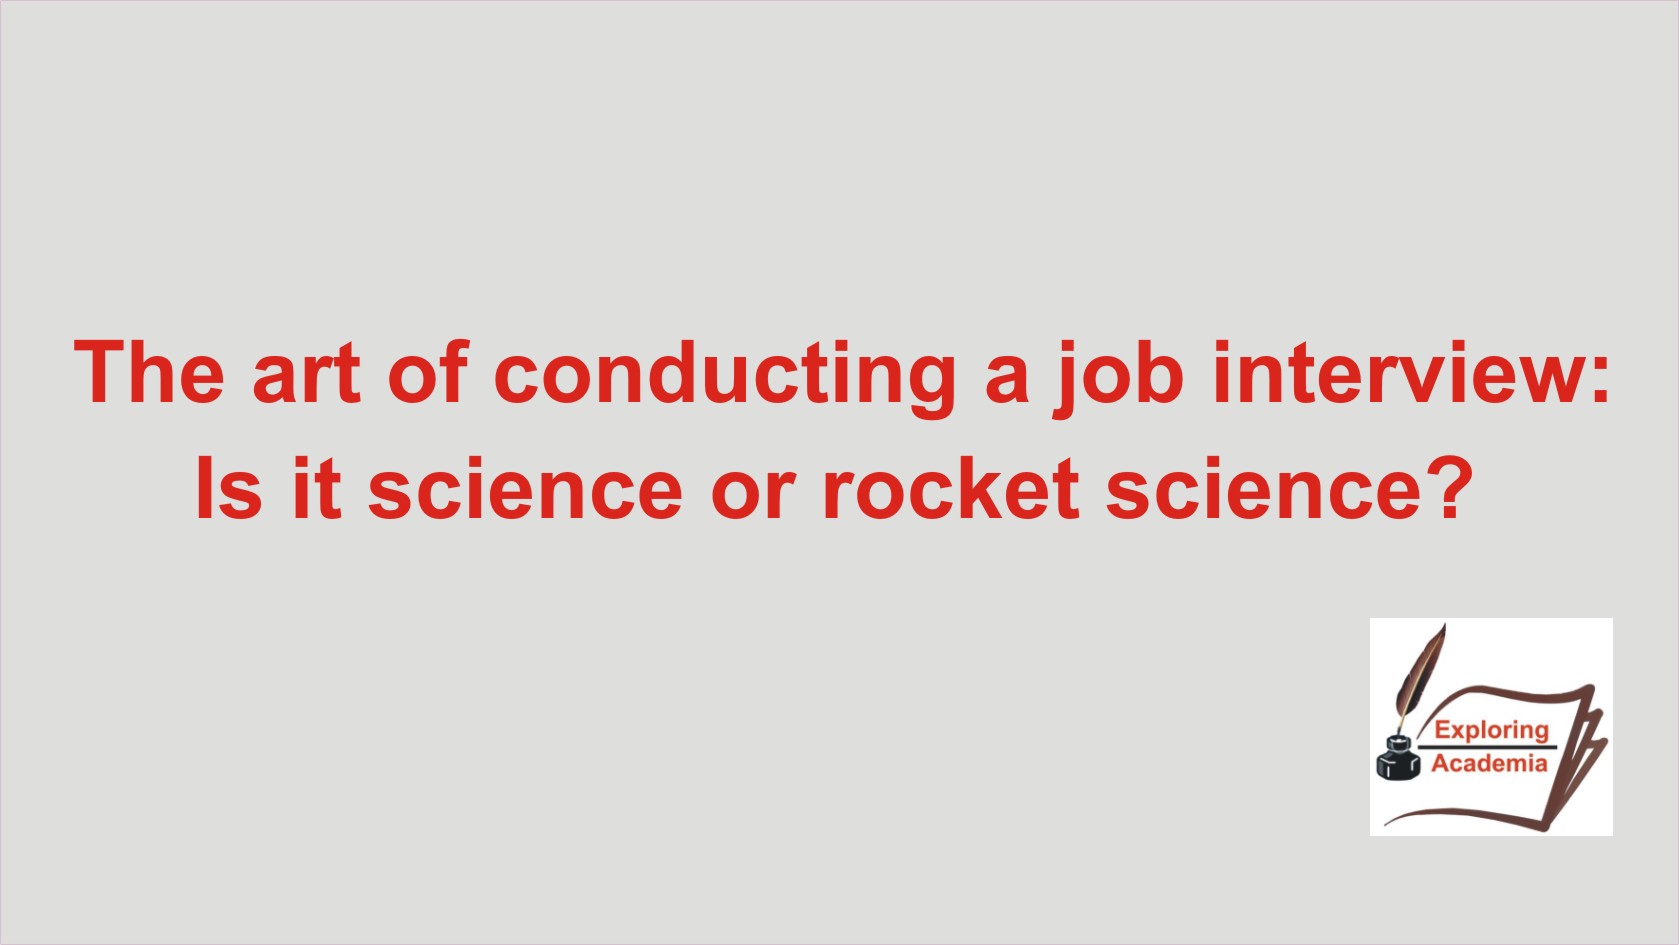 The art of conducting a job interview: Is it science or rocket science?